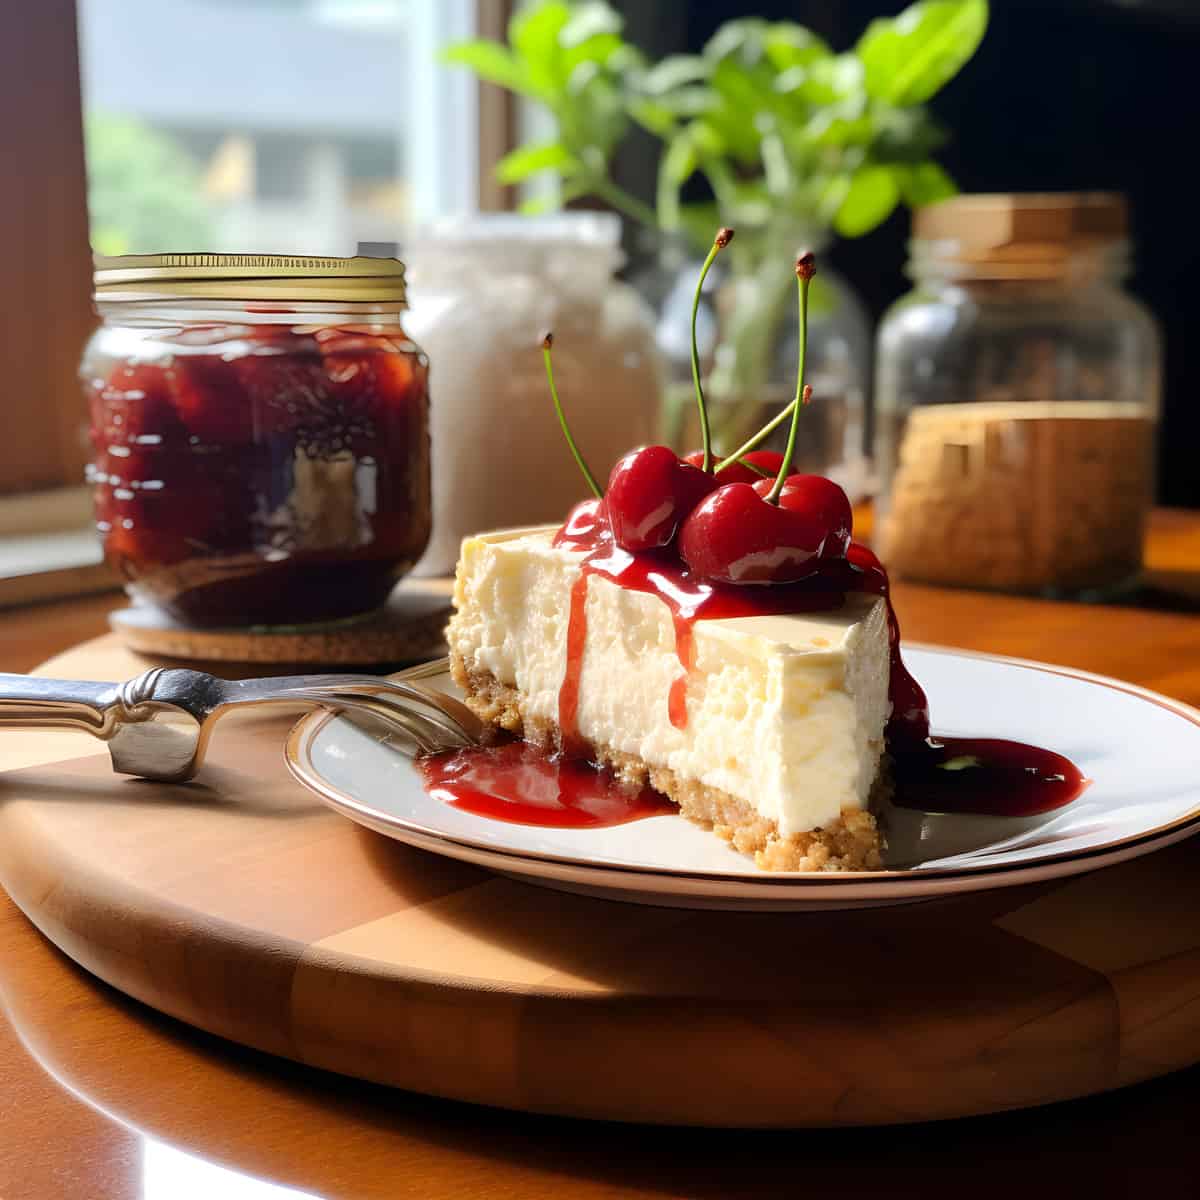 Cheesecake on a kitchen counter